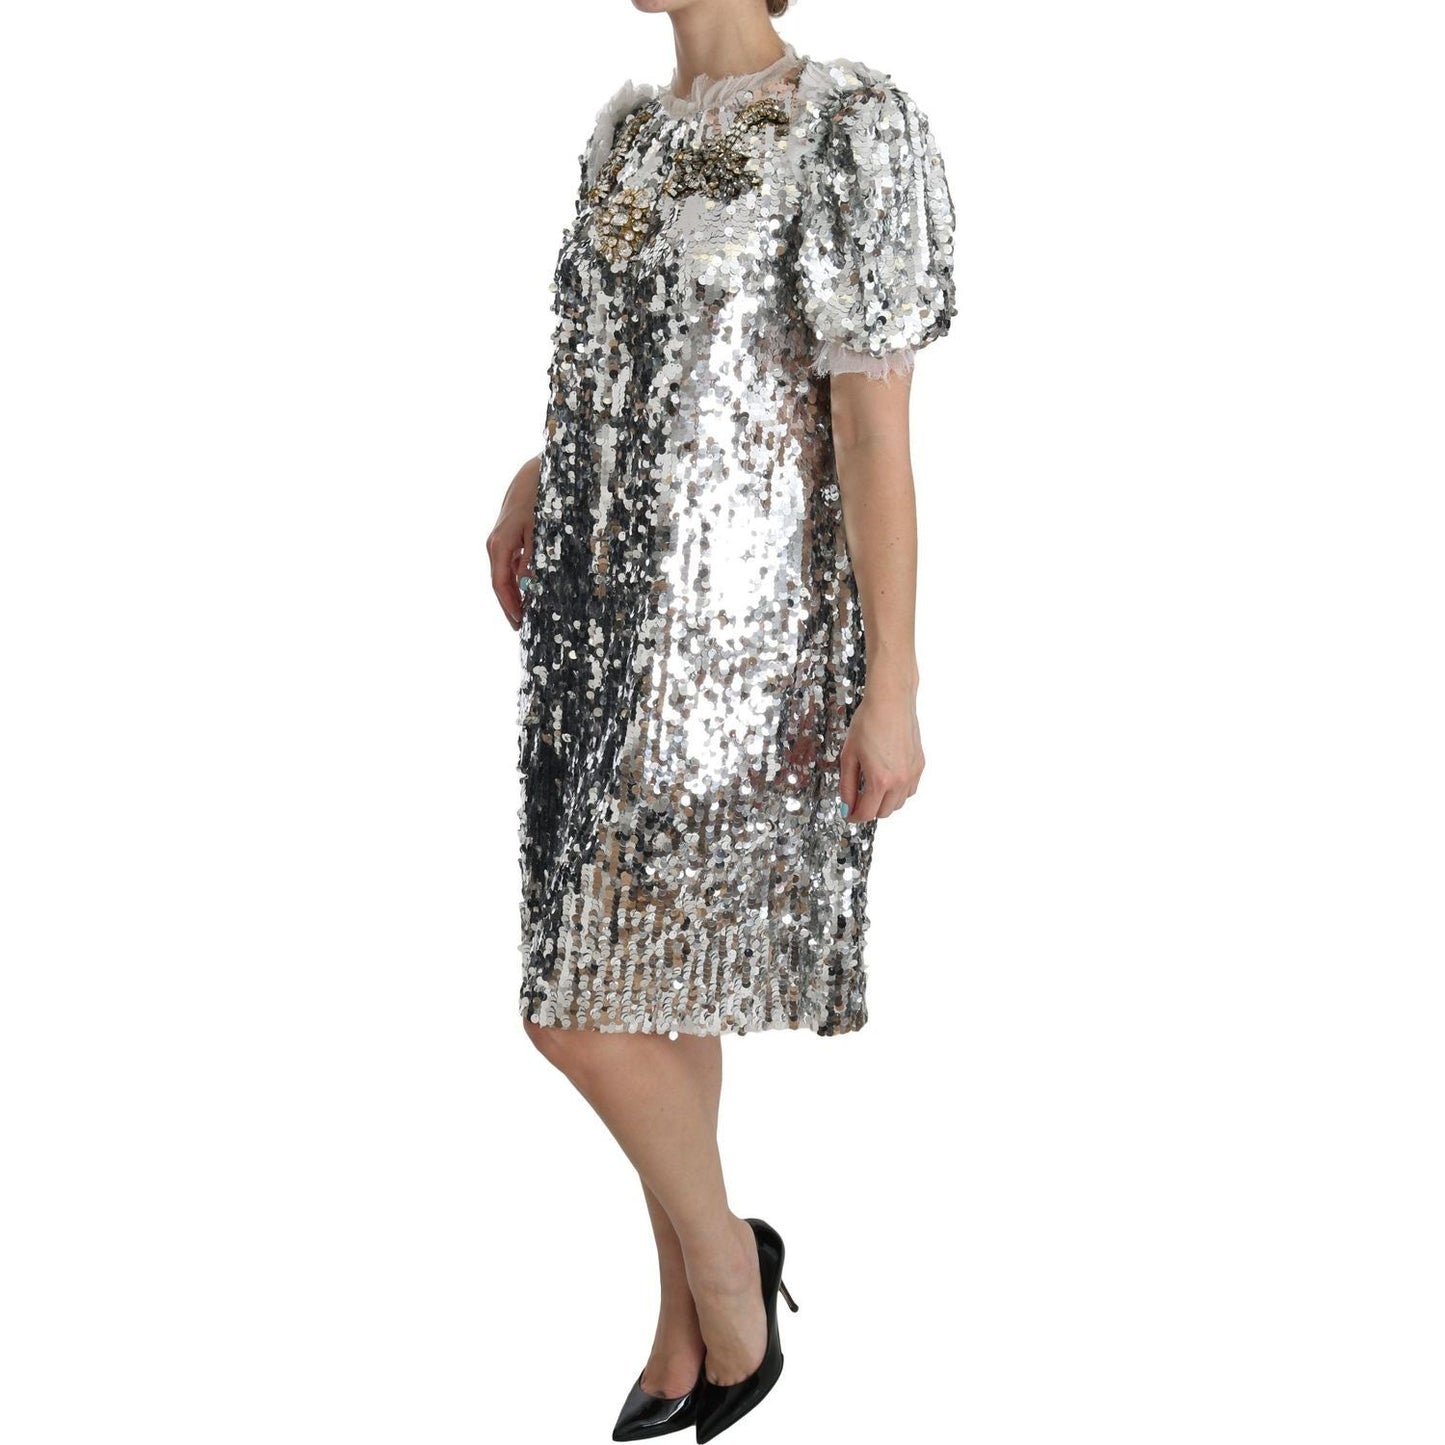 Dolce & Gabbana Elegant Silver A-Line Dress with Crystal Accents silver-sequined-crystal-shift-gown-dress IMG_0674-scaled-def92d16-635.jpg